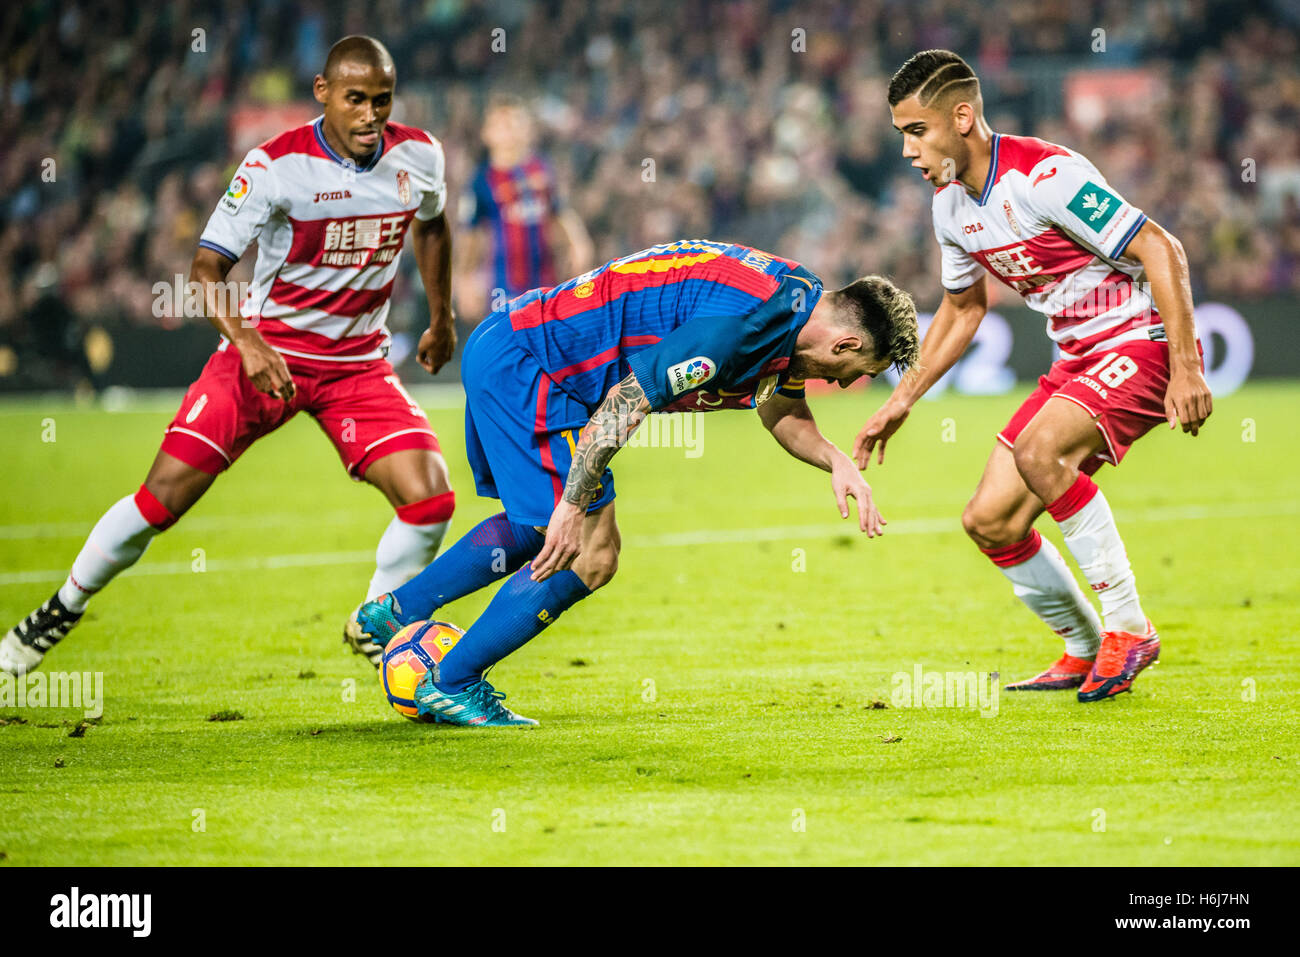 Barcelona, Catalonia, Spain. 29th Oct, 2016. FC Barcelona forward MESSI in action during the LaLiga match between FC Barcelona and Granada CF at the Camp Nou stadium in Barcelona © Matthias Oesterle/ZUMA Wire/Alamy Live News Stock Photo